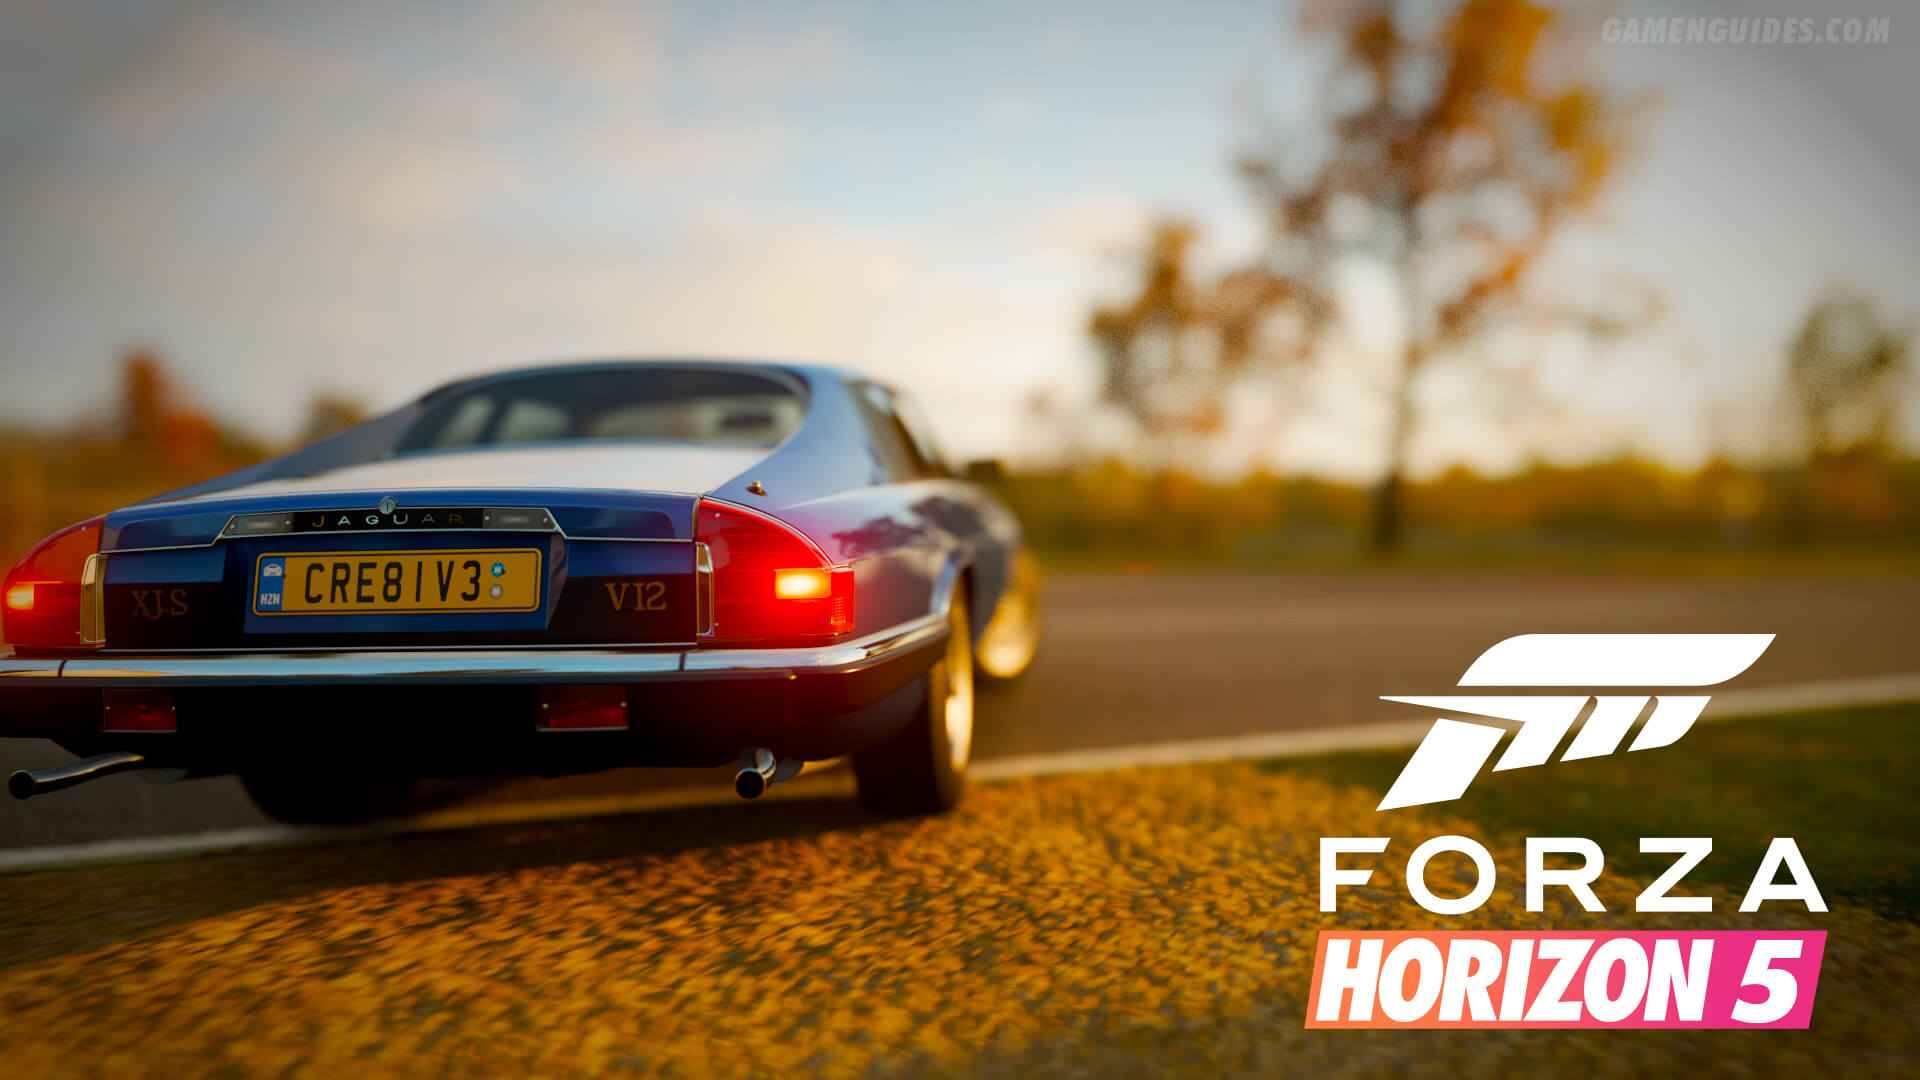 Forza Horizon 5: When Will It Be Released?